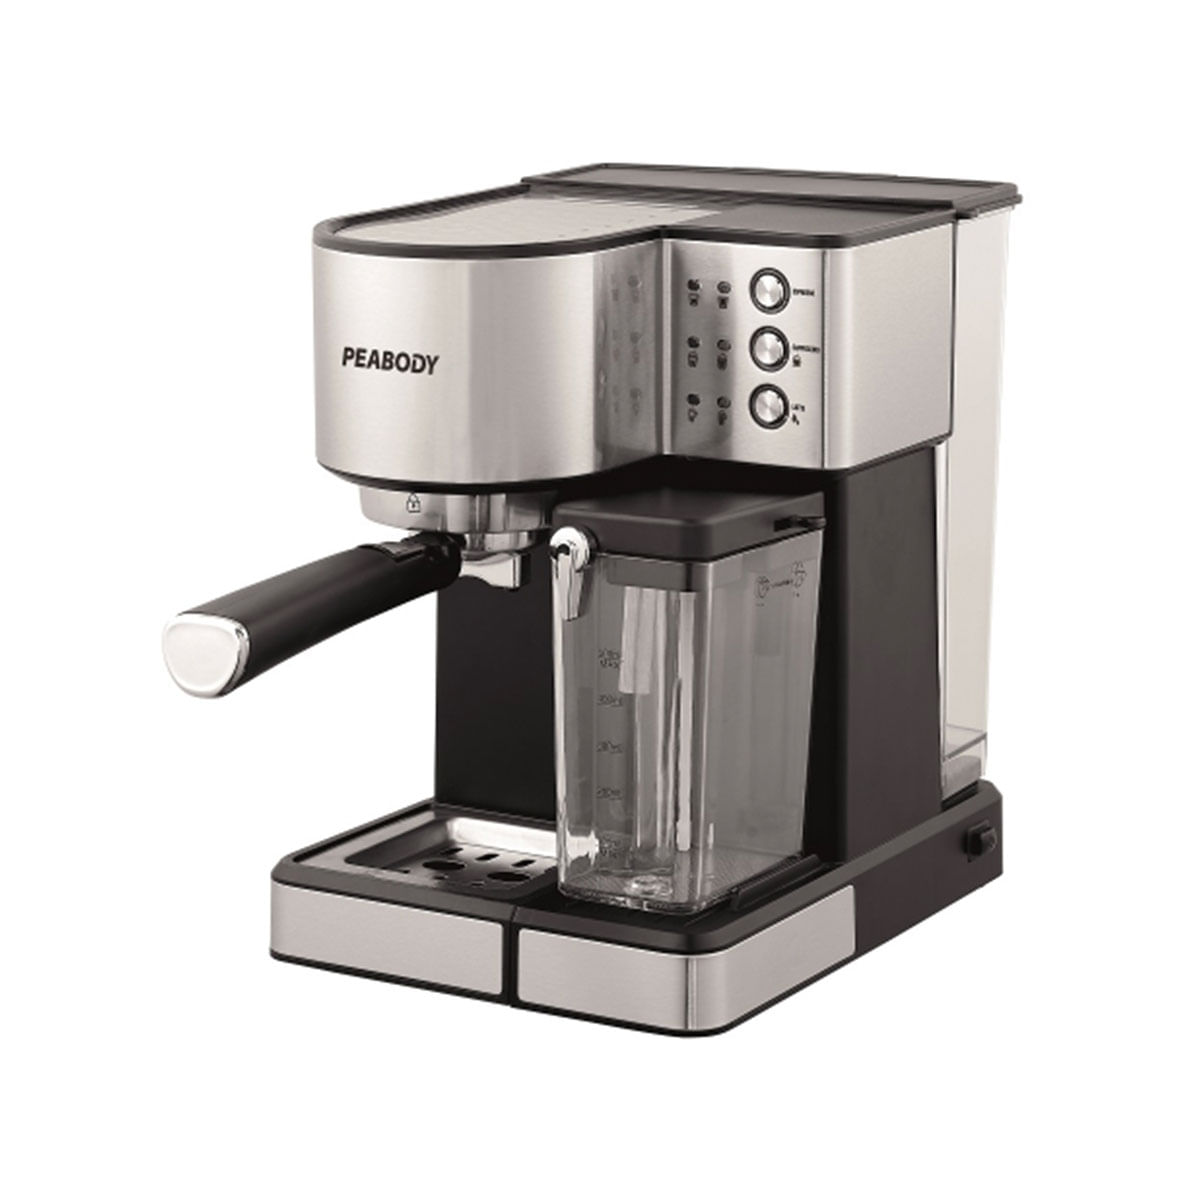 cafetera-express-peabody-1350w